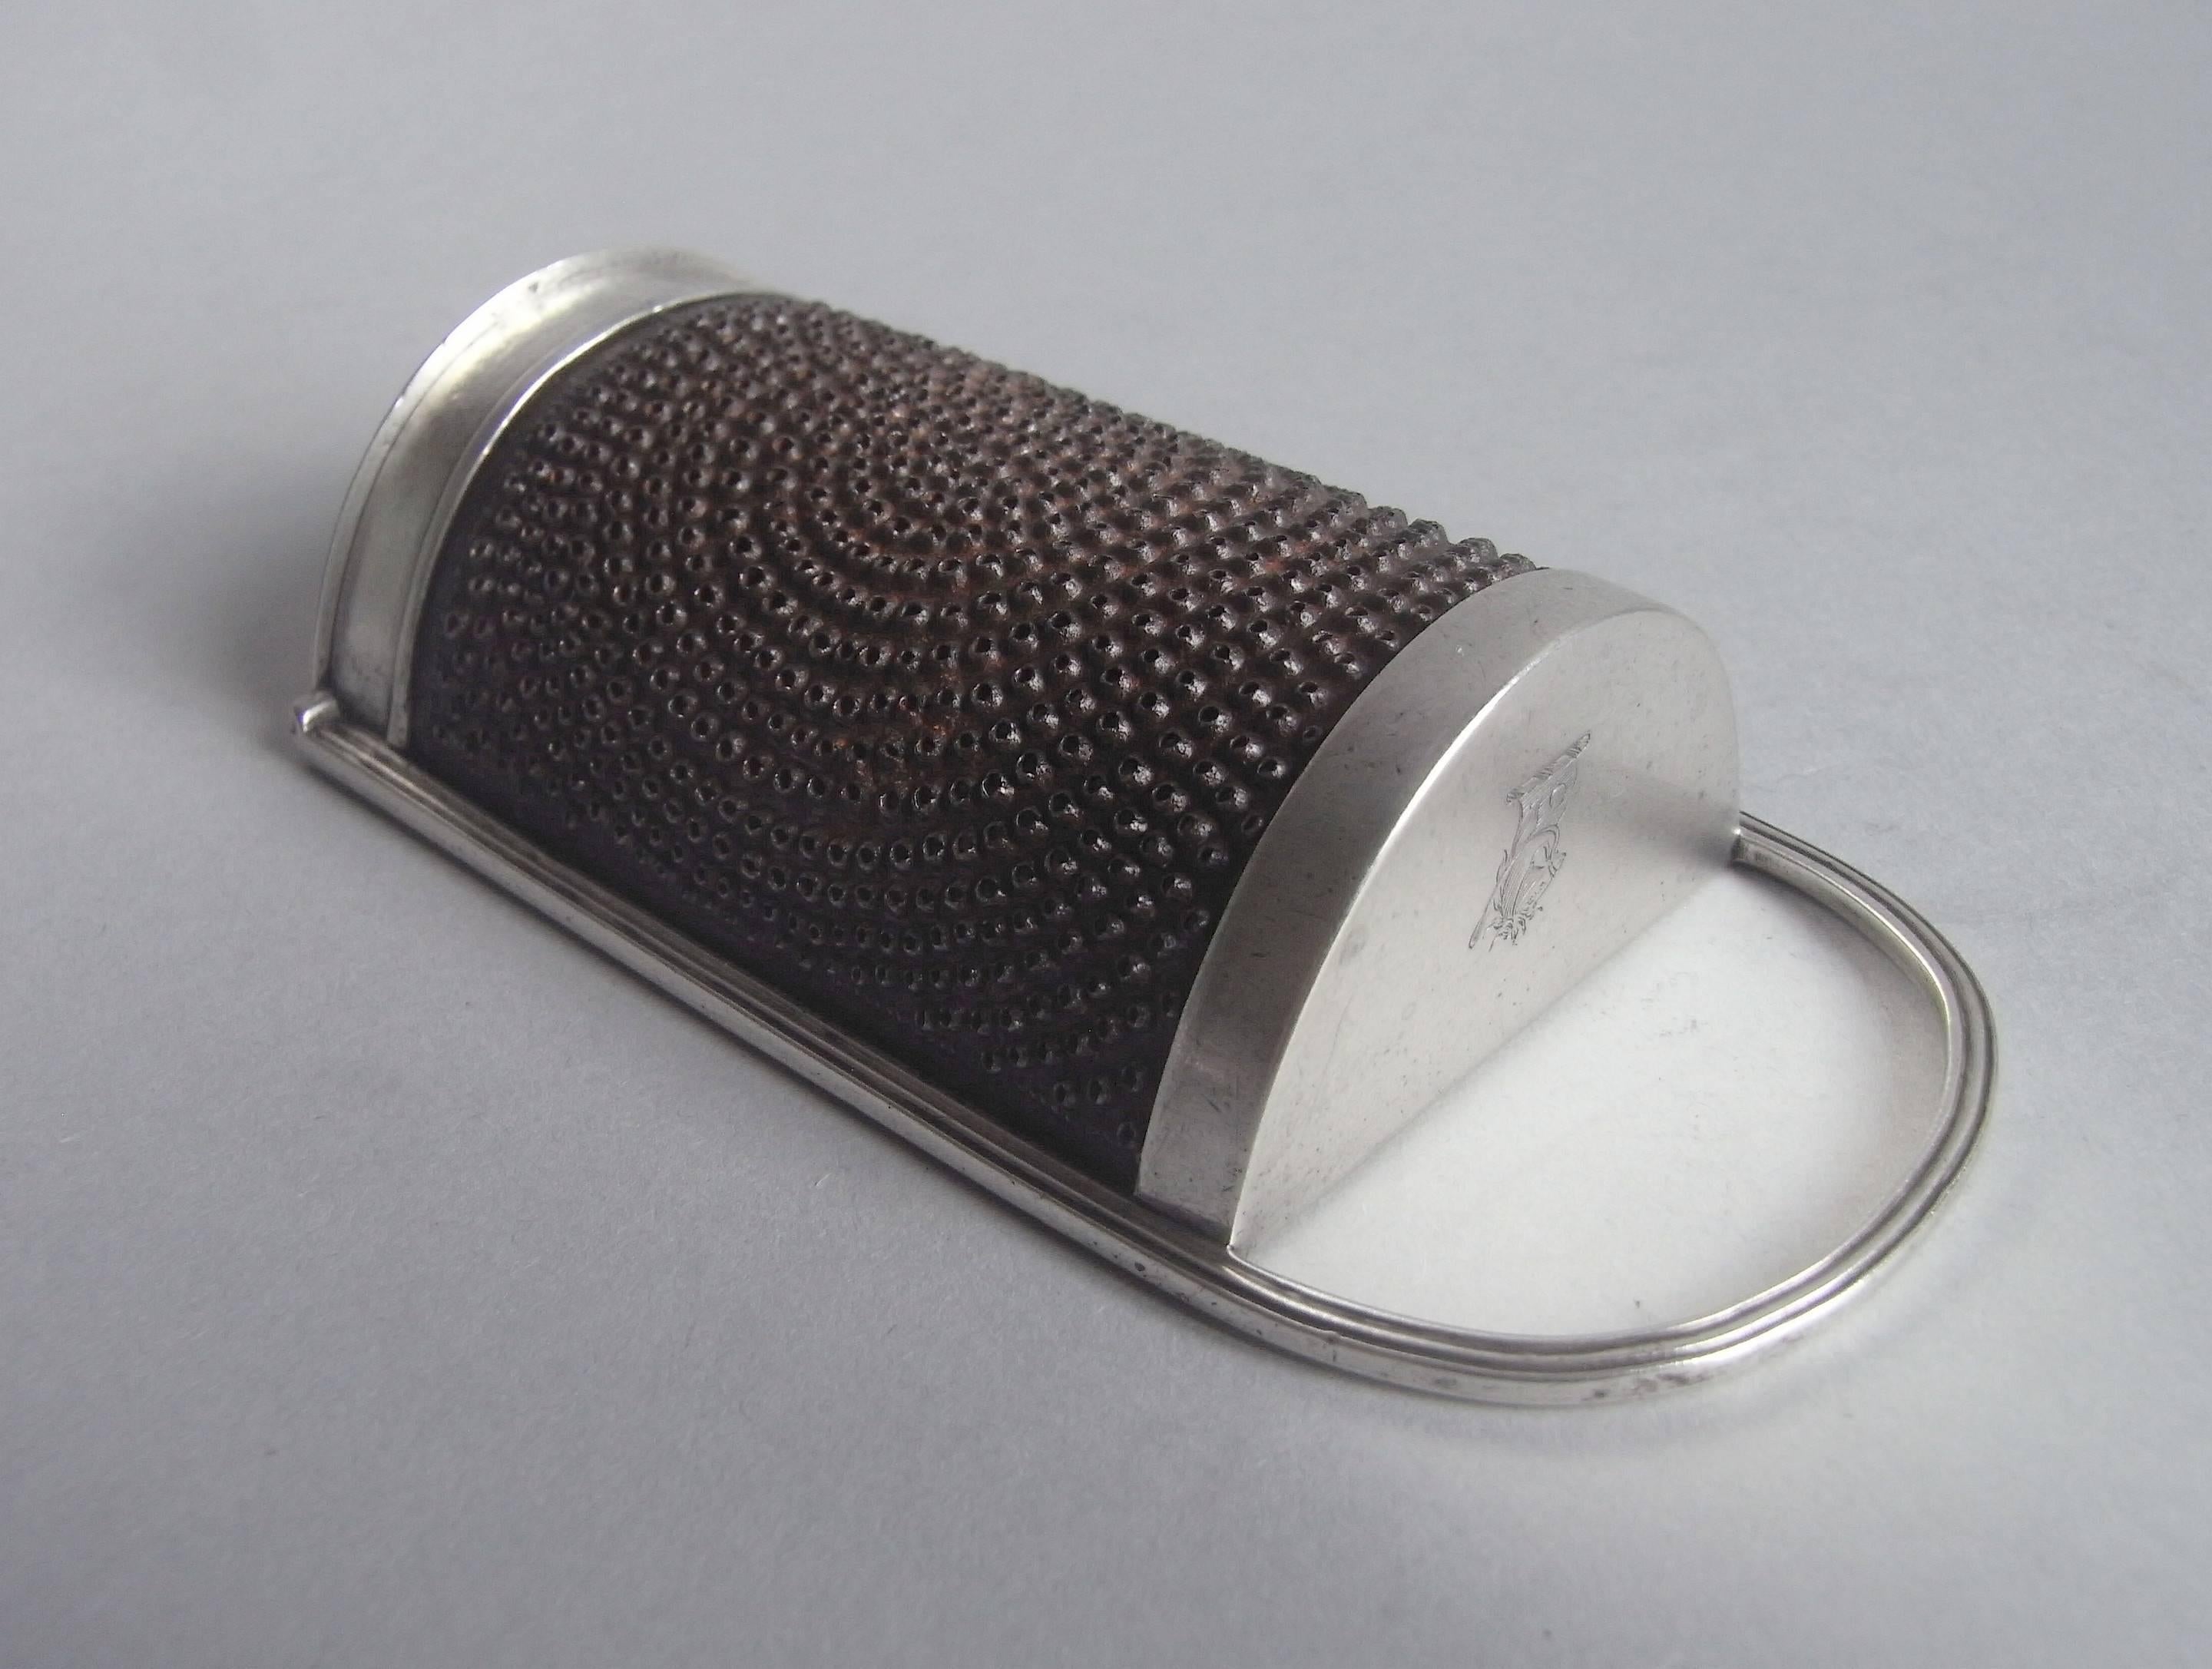 PHIPPS & ROBINSON. An exceptional George III "Kitchen" Nutmeg Grater made in Lon